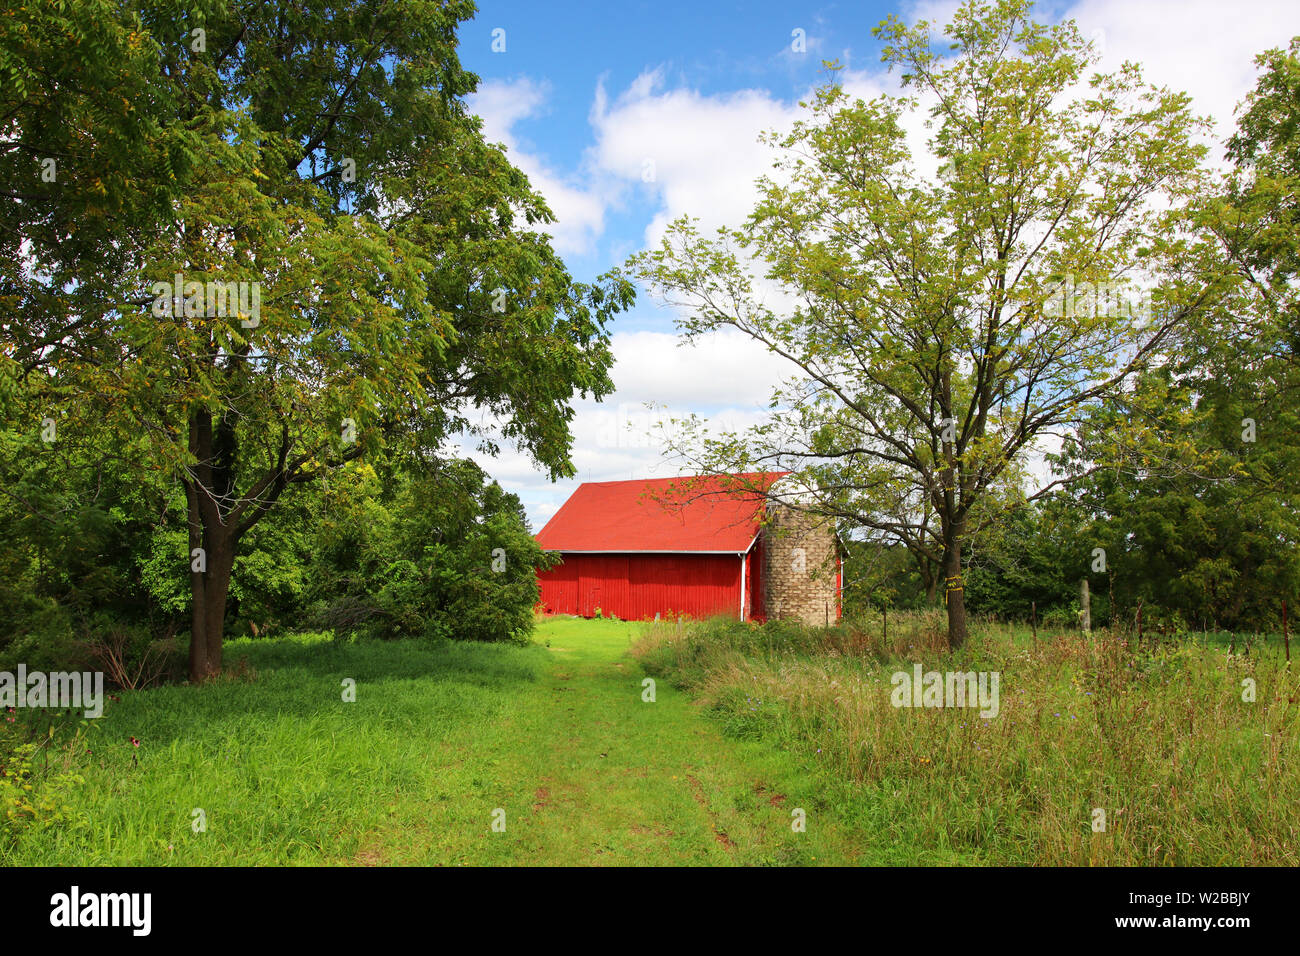 Beautiful summer rural landscape with classic red barn between trees. Midwest USA, Wisconsin, Madison area. Stock Photo